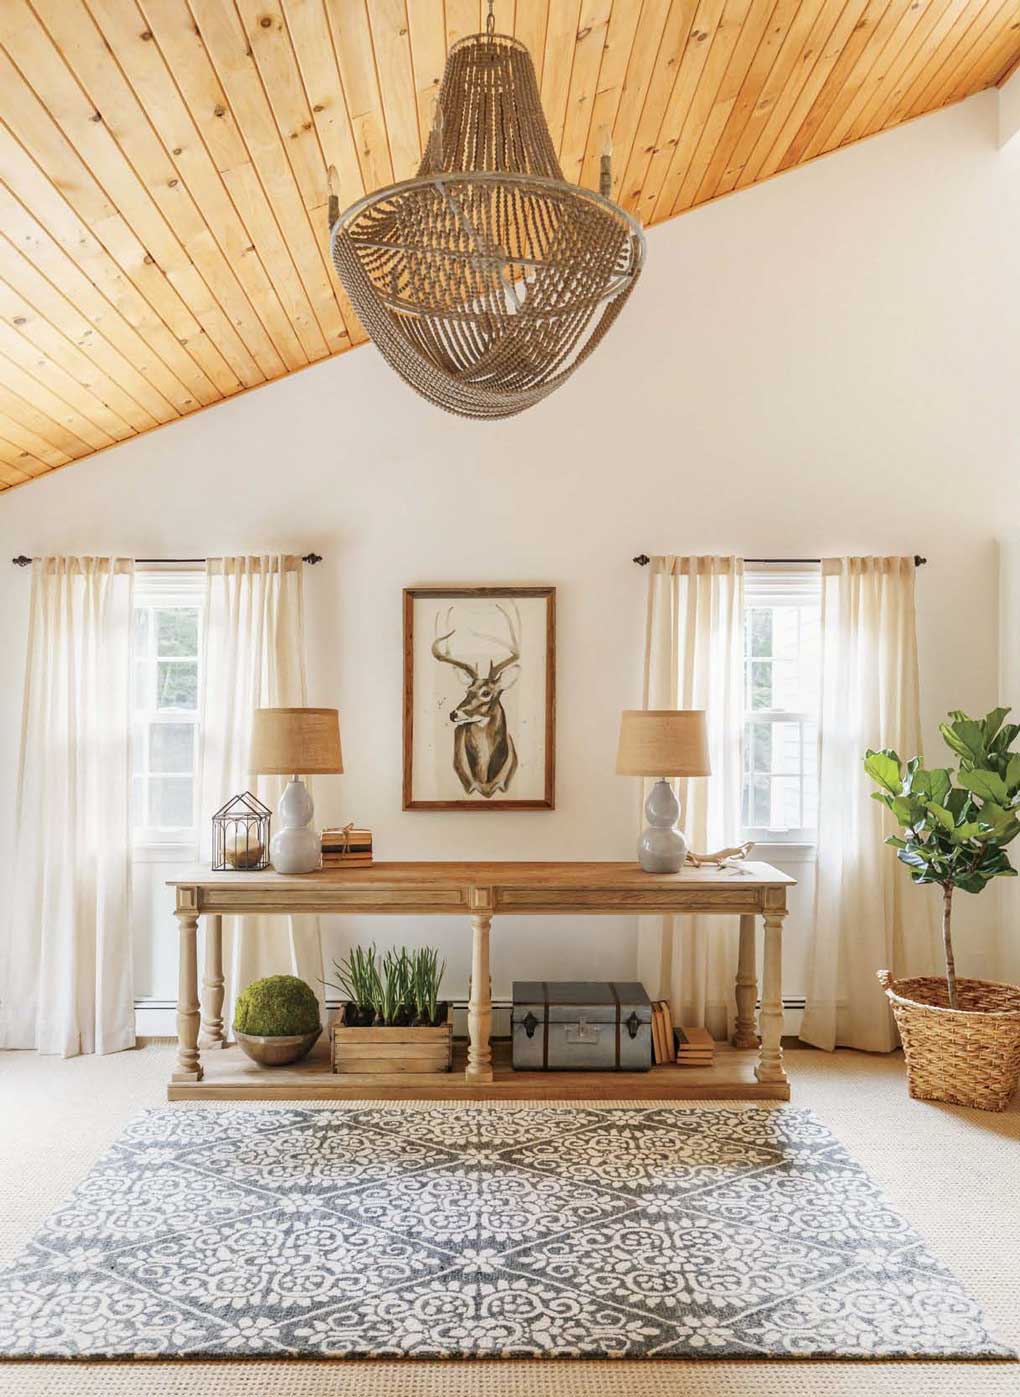 Rustic farmhouse open space with vaulted wooden ceilings and a beaded chandelier with a regal framed deer in between two windows. 